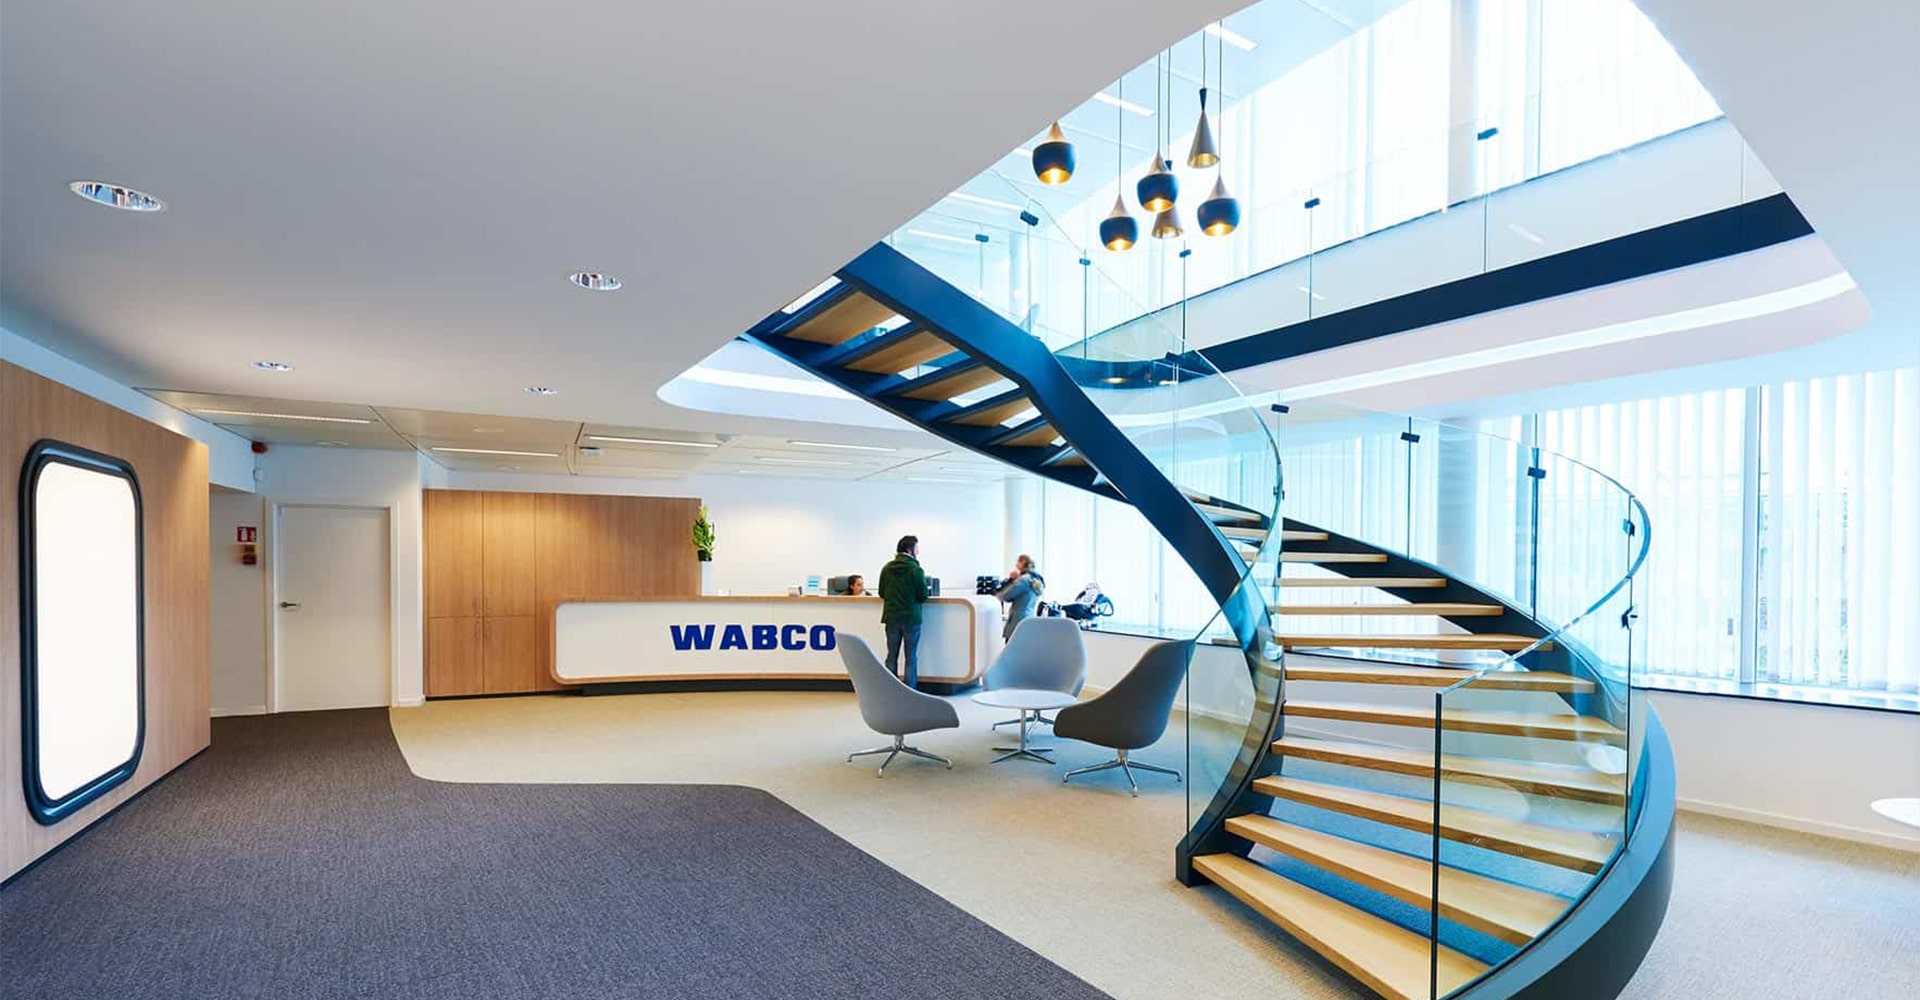 Large and bright reception area at Wabco HQ